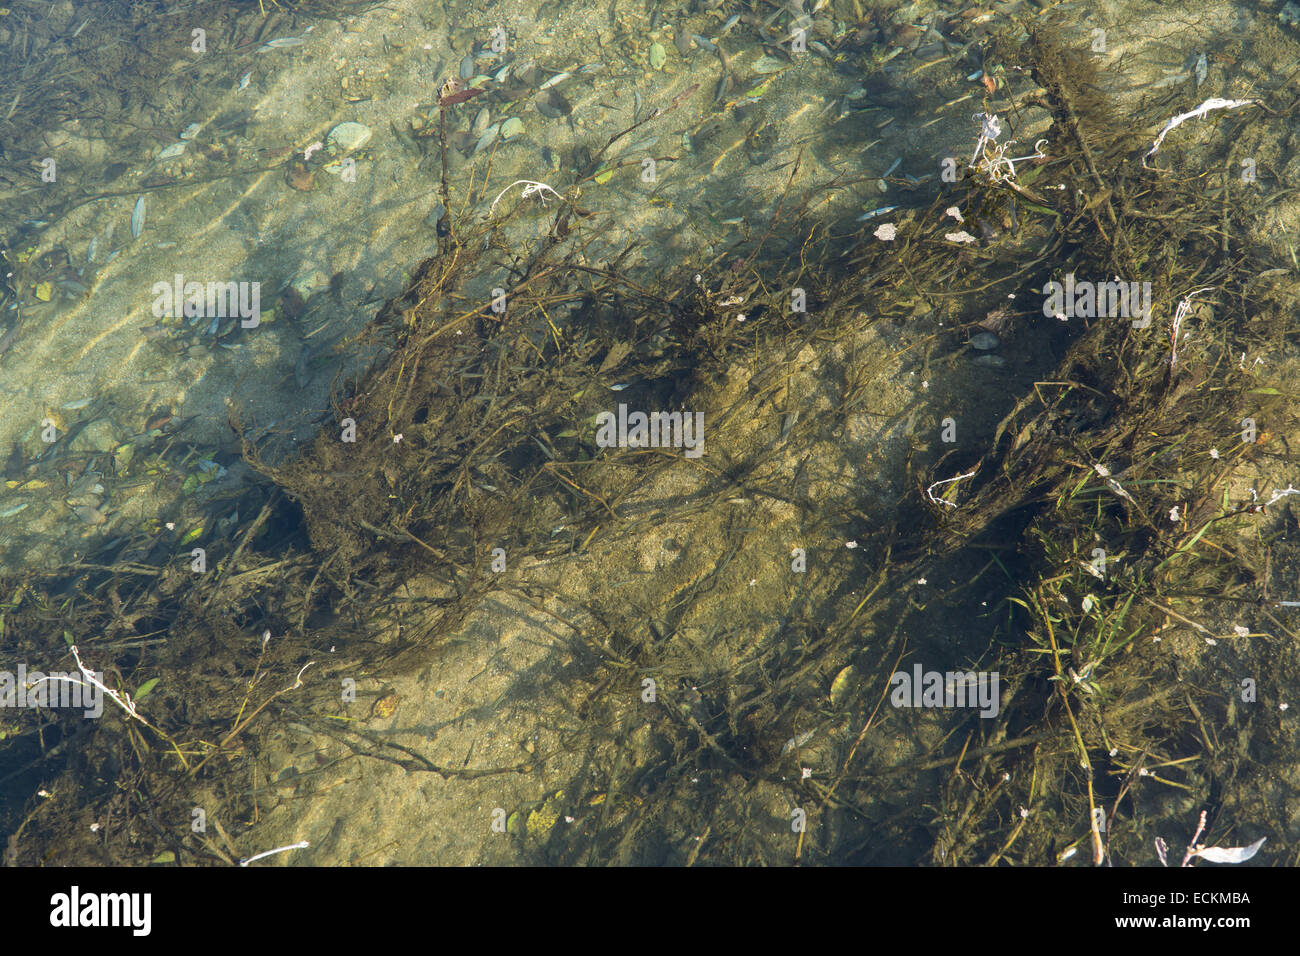 closeup of polluted water in a stream Stock Photo